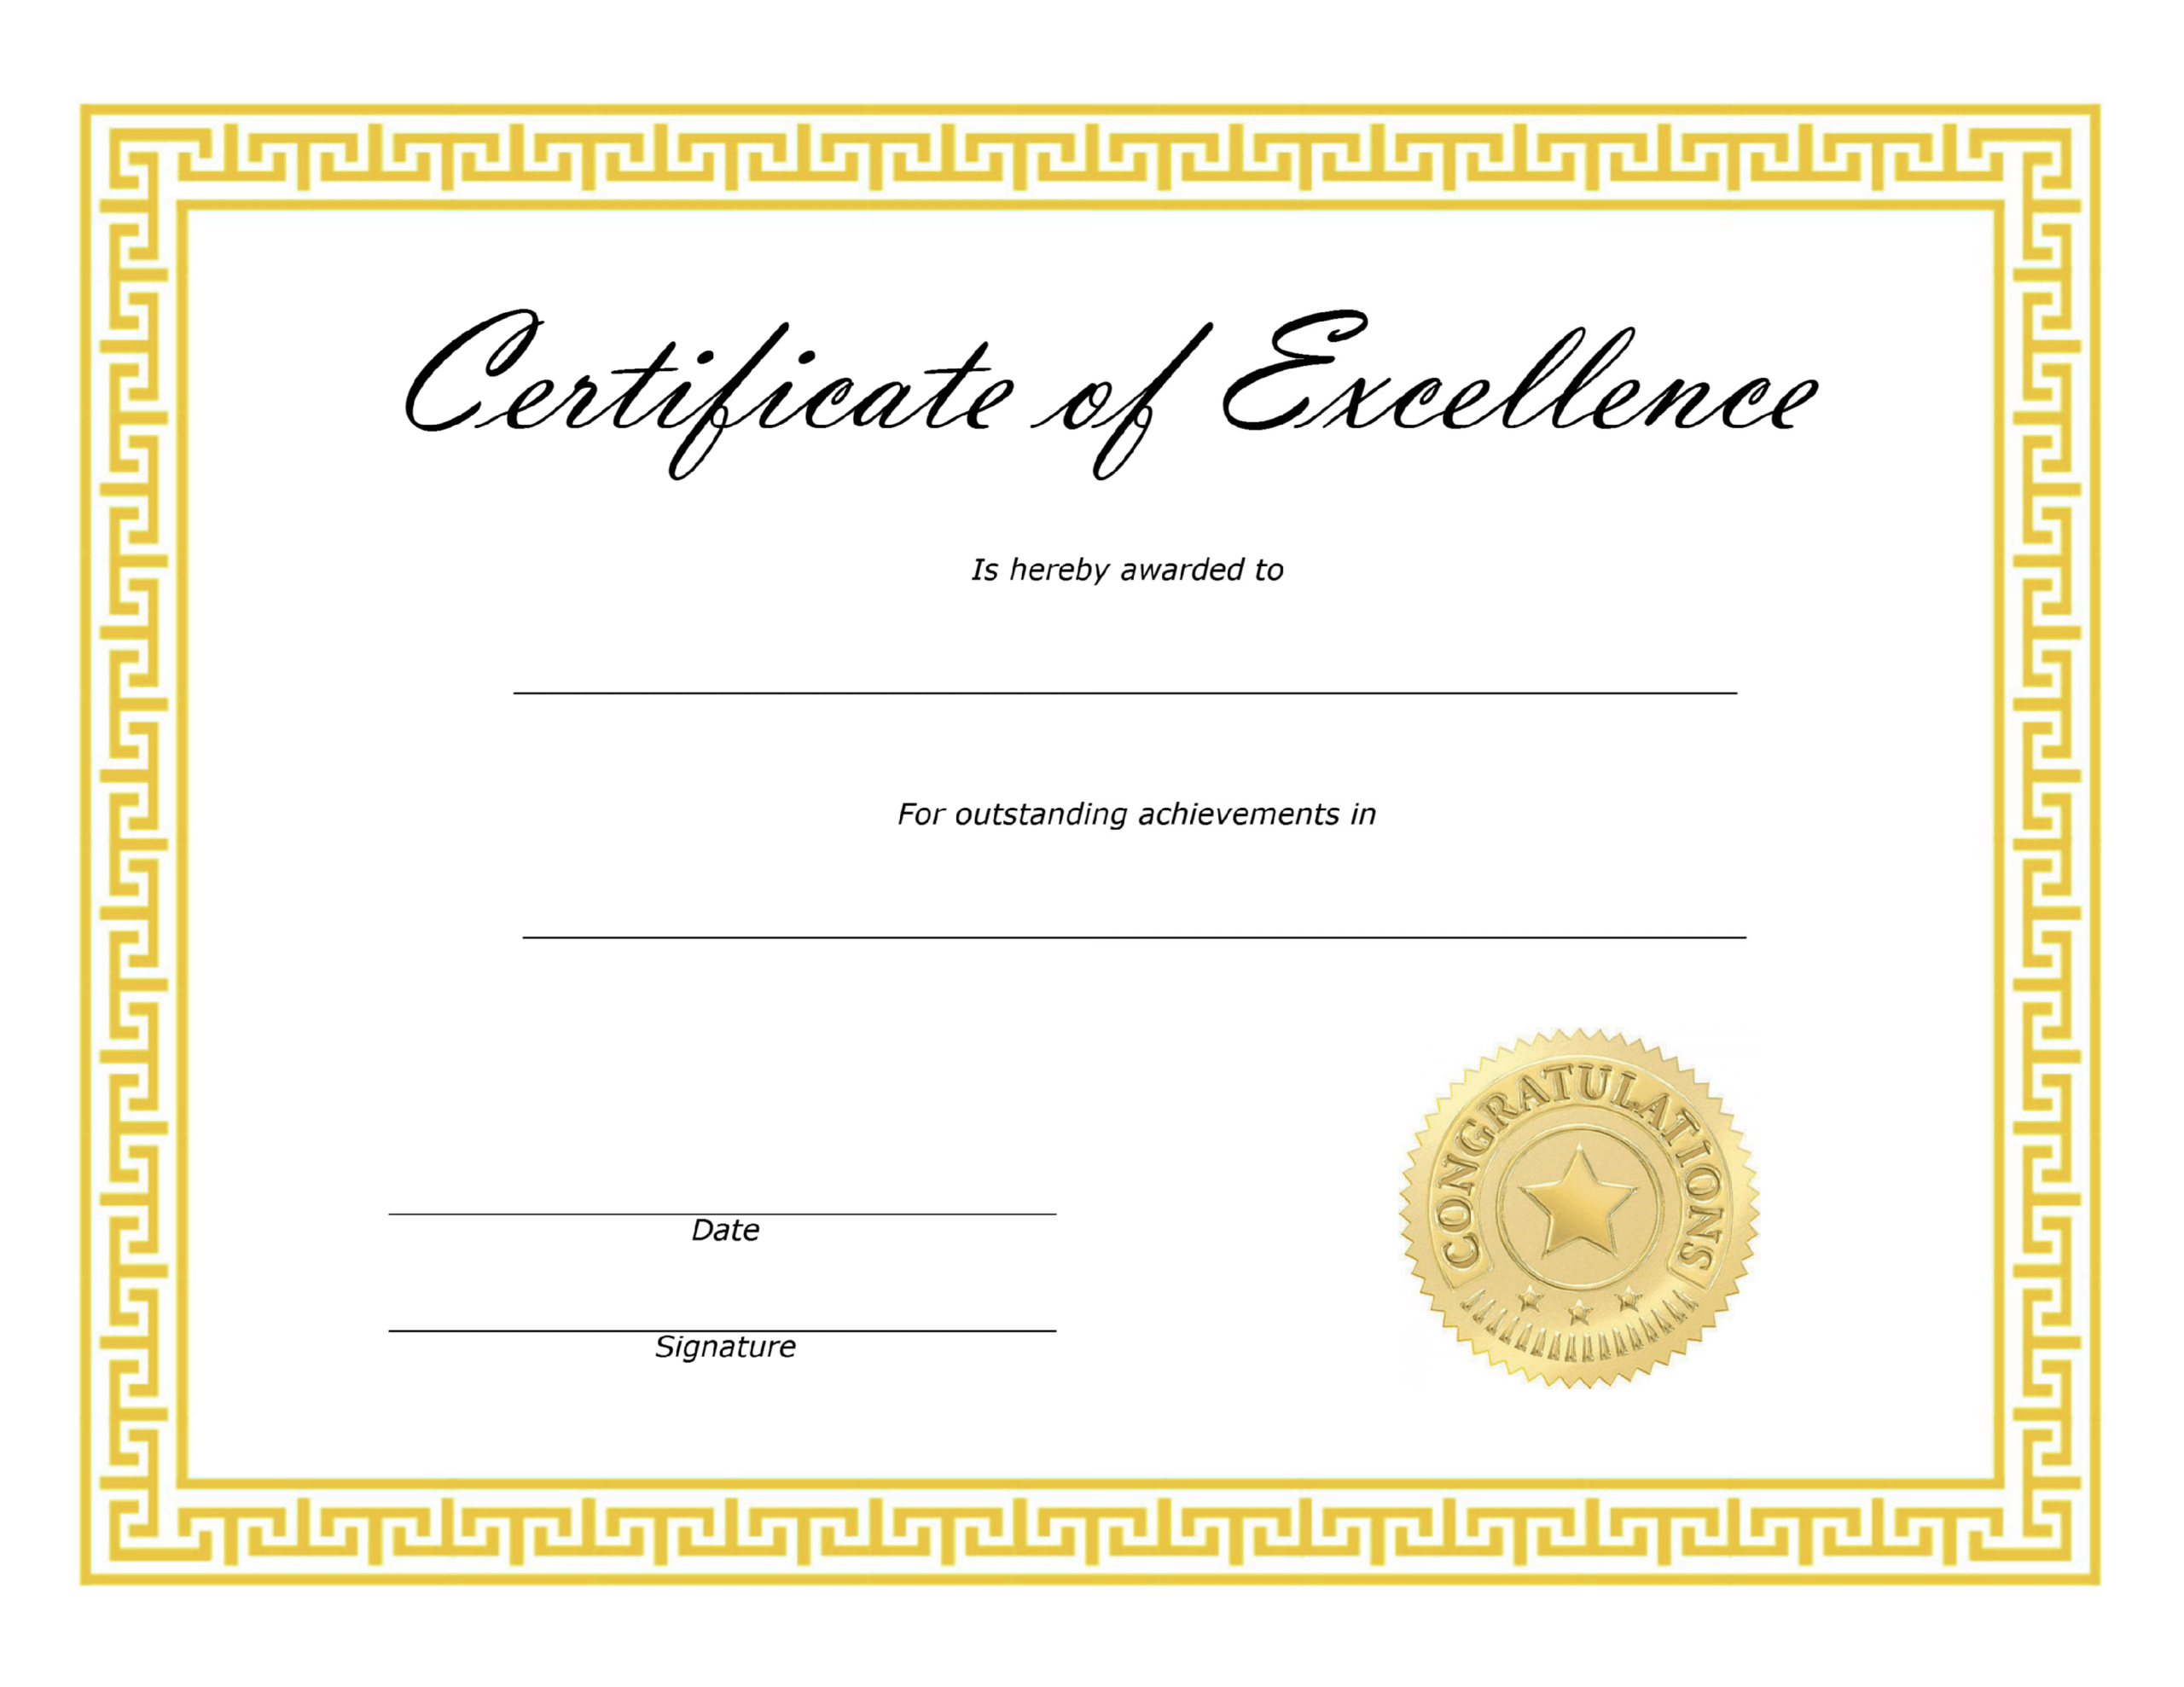 ❤️ Free Sample Certificate Of Excellence Templates❤️ Pertaining To Certificate Of Excellence Template Free Download